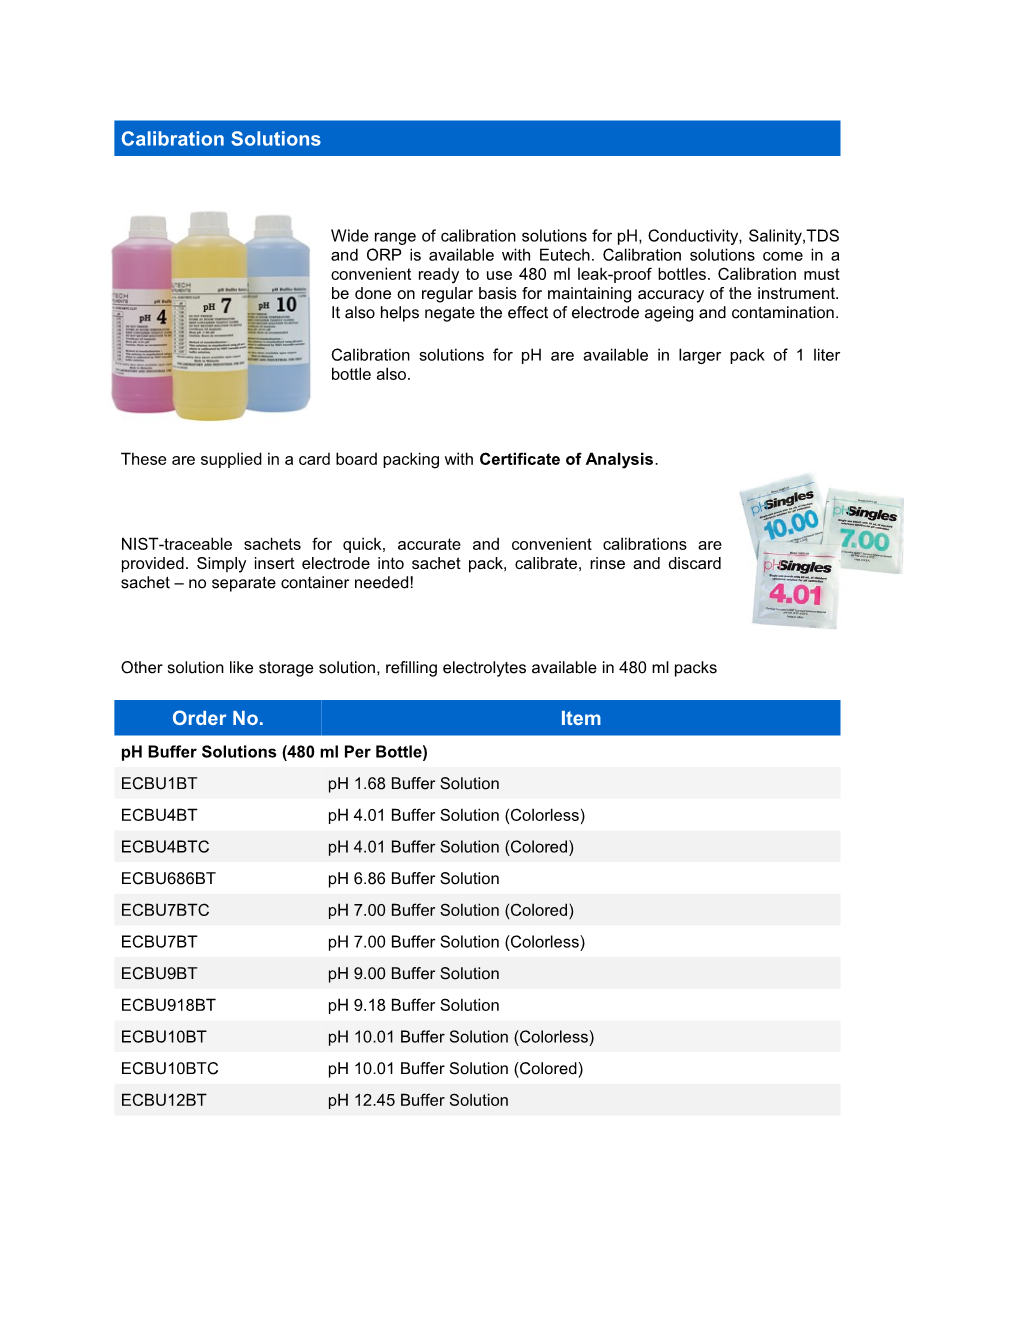 Calibration Solutions for Ph Are Available in Larger Pack of 1 Liter Bottle Also